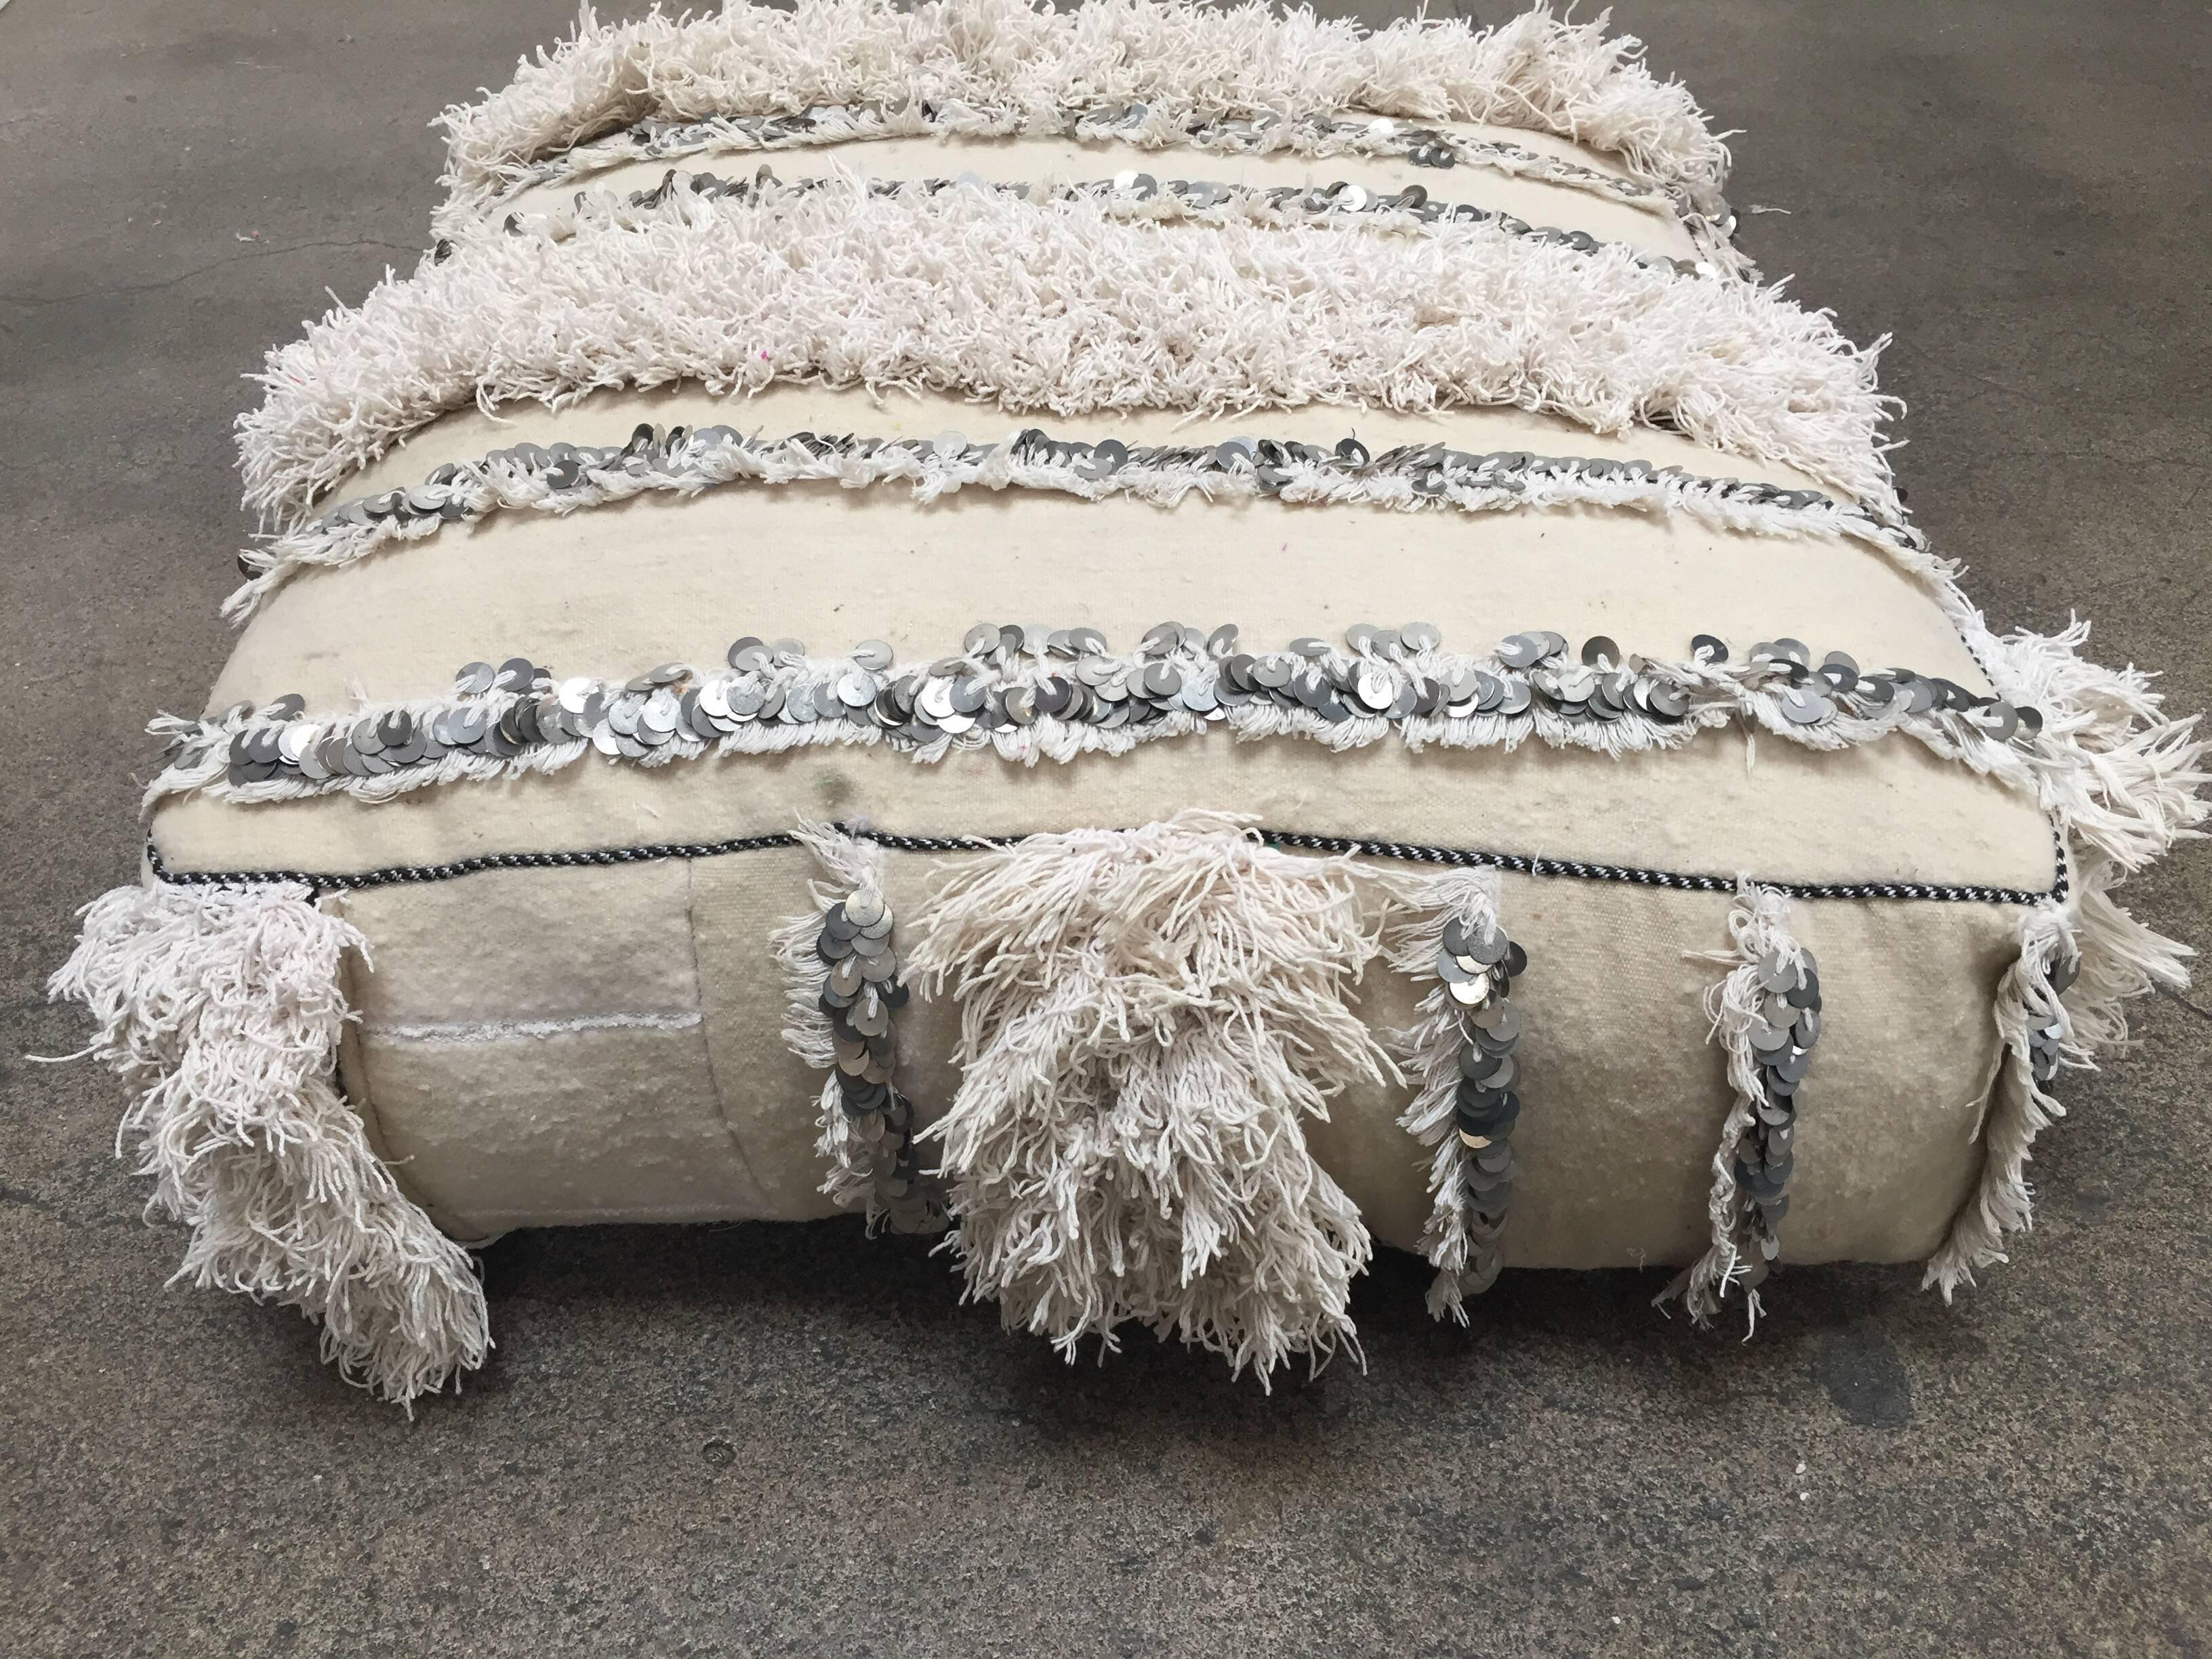 20th Century Moroccan Wedding Floor Pillow Pouf with Silver Sequins and Long Fringes